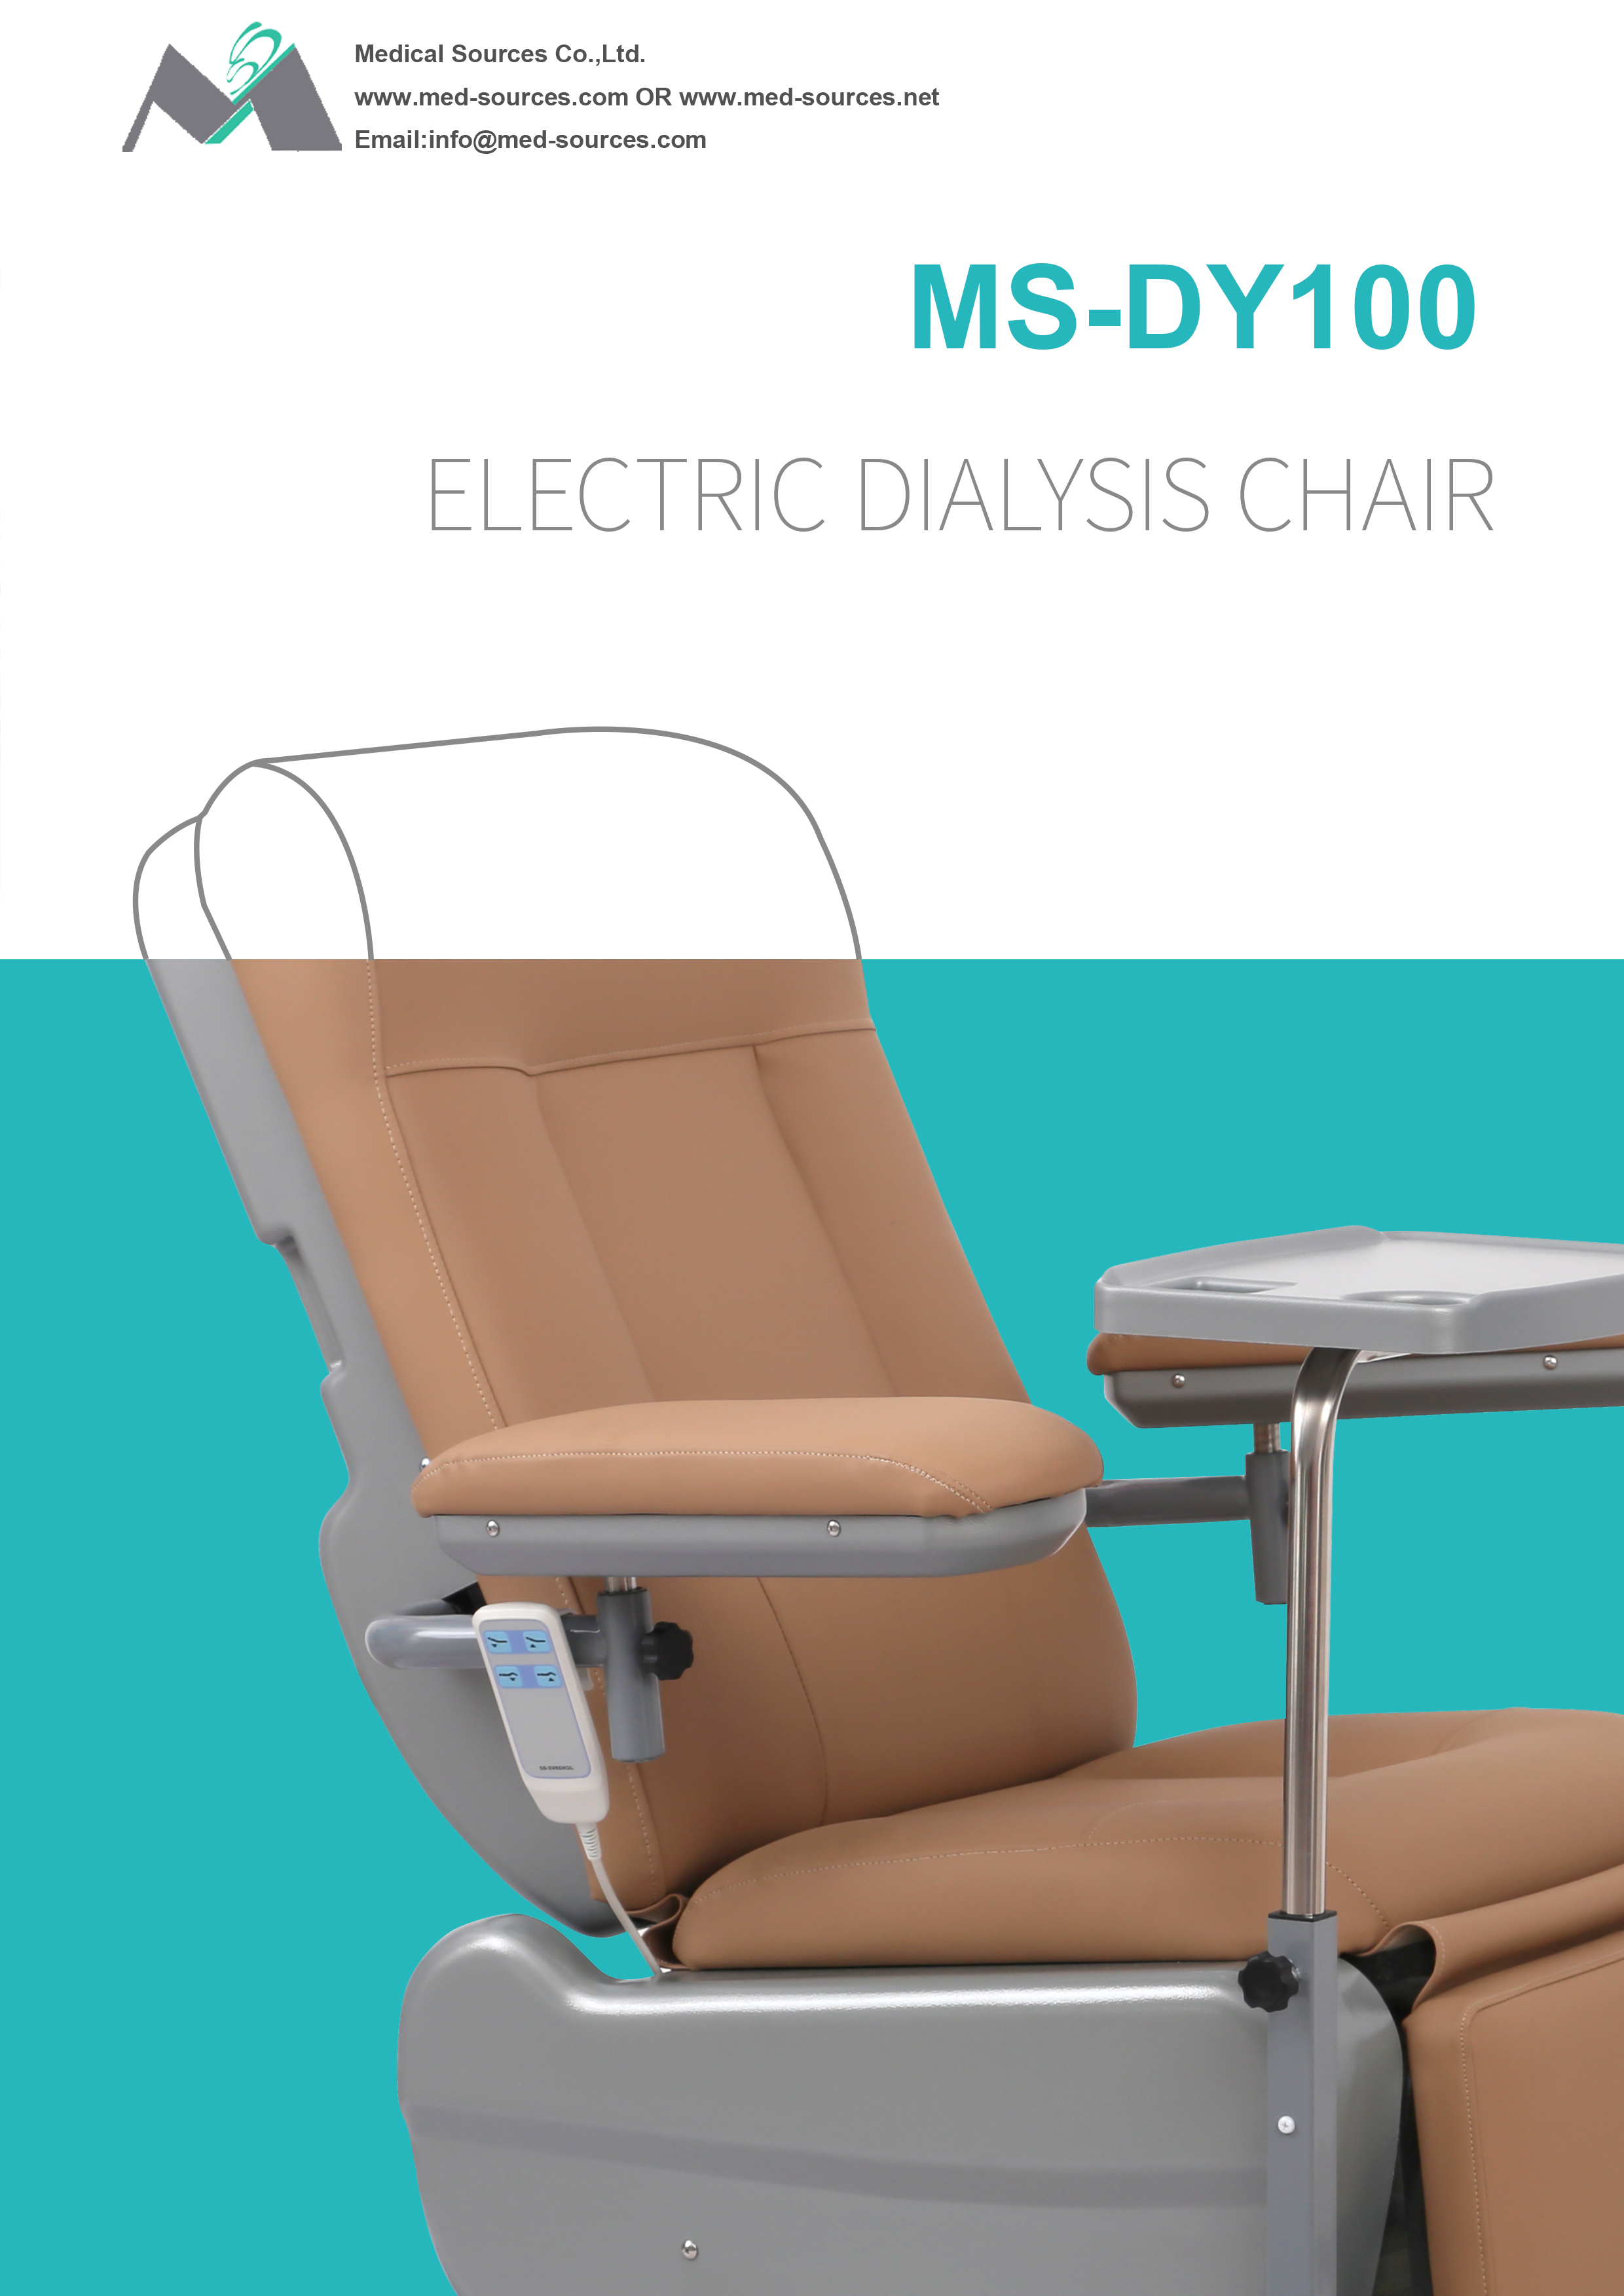 MS-DY100 Electric Dialysis Chair-1